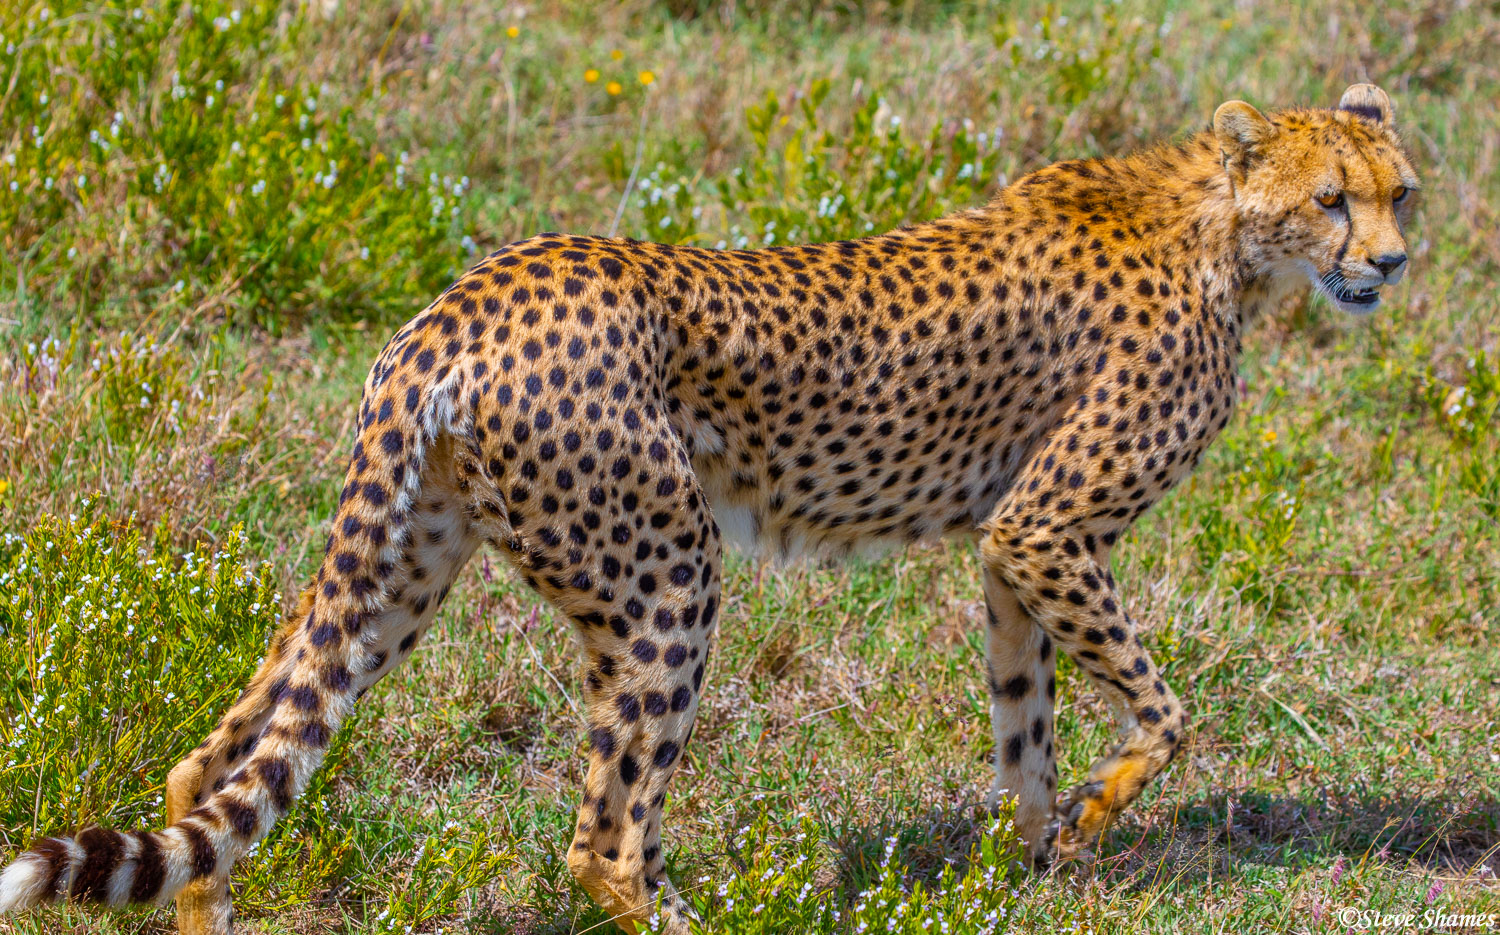 A cheetah on the move. He caught a rabbit right after this picture was taken.